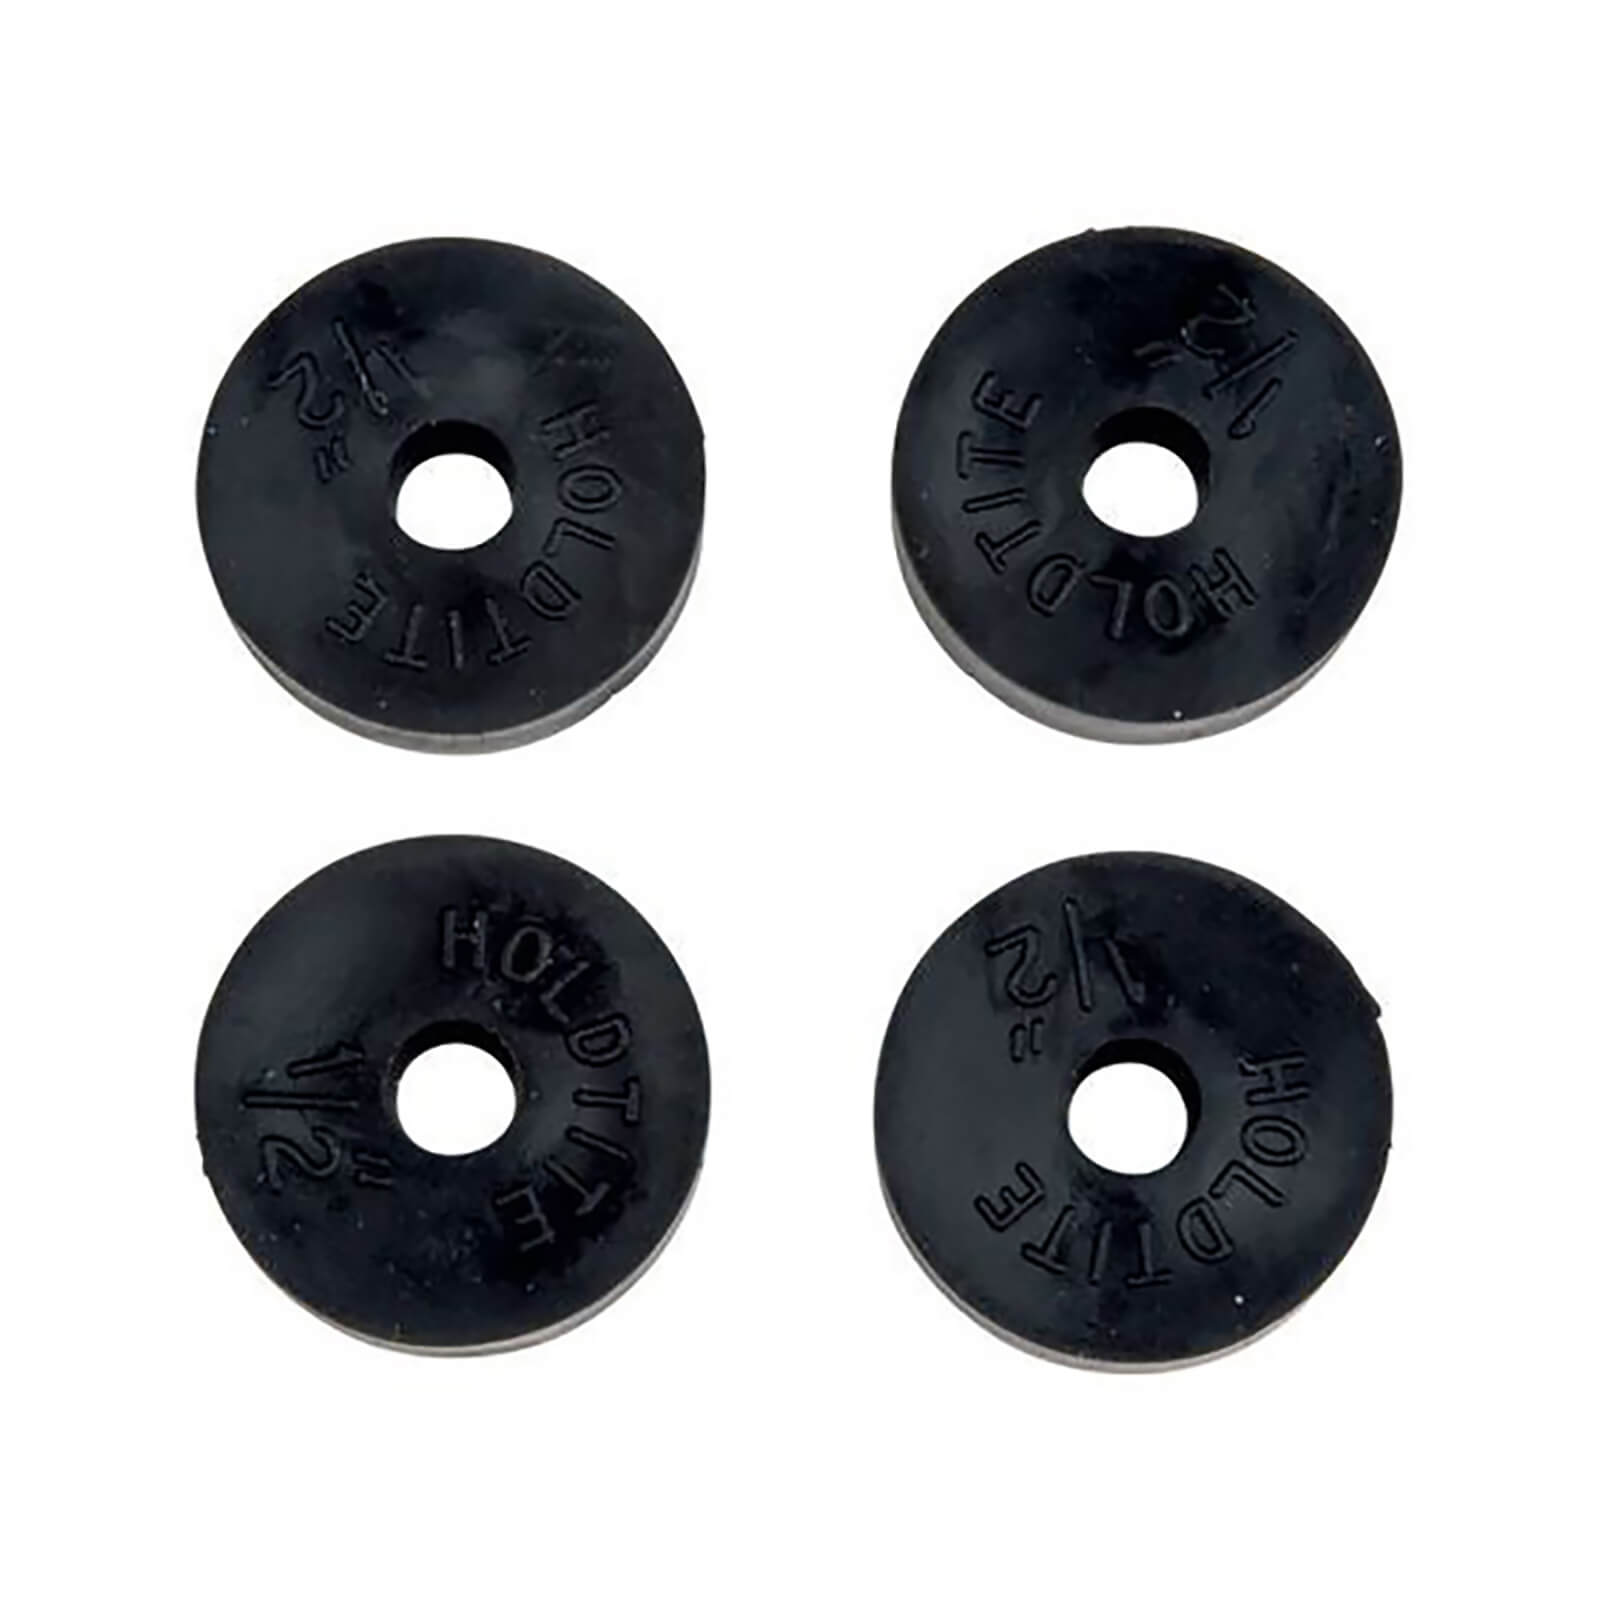 Photo of Flat Tap Washers - 13mm - 4 Pack